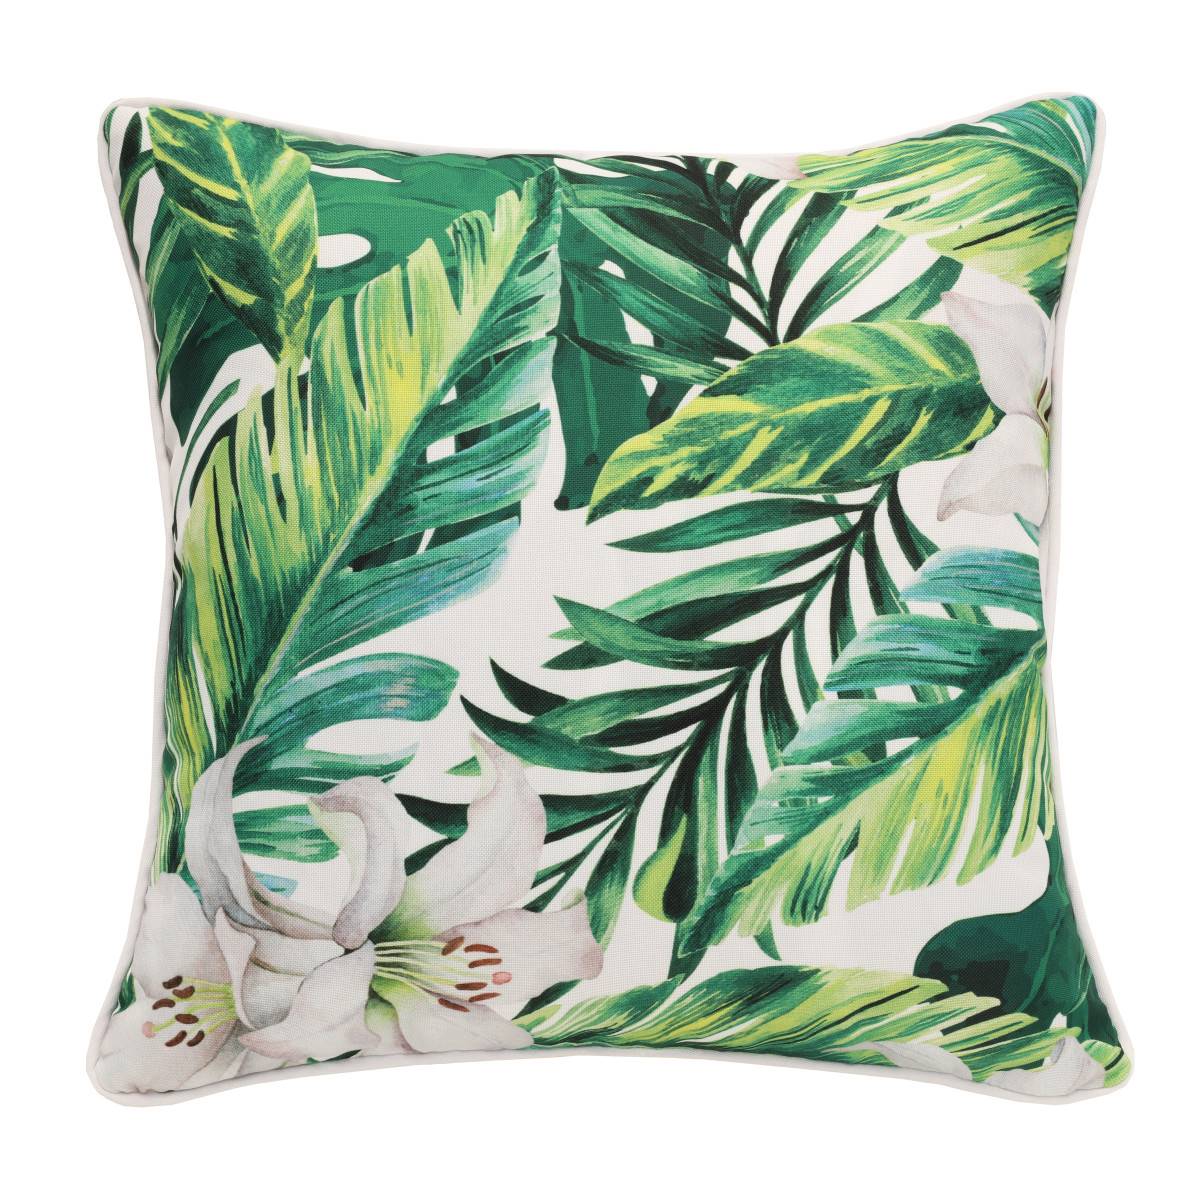 Commonwealth(tm) Lily Floral Decorative Pillow - 18x18